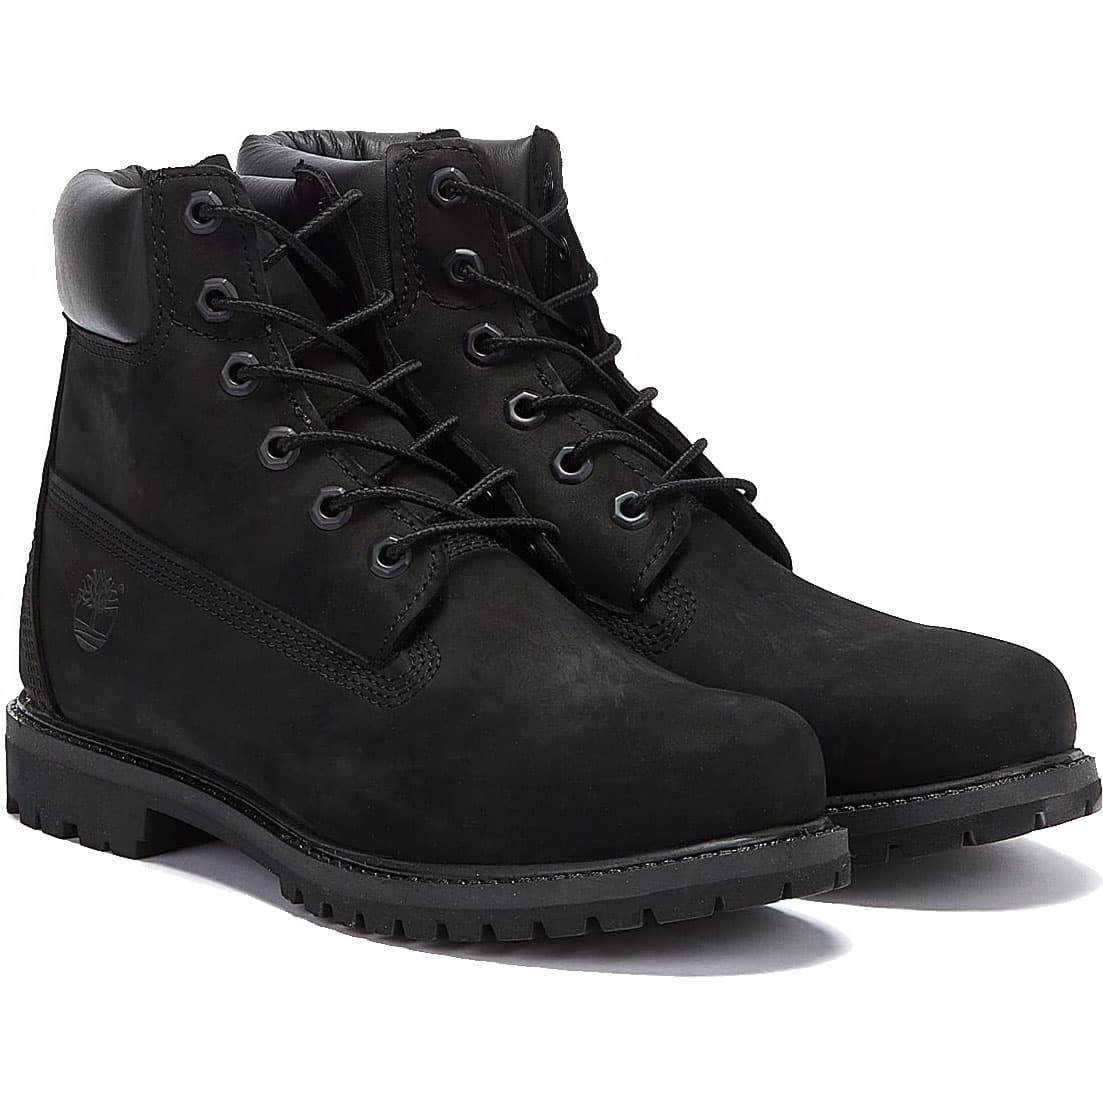 Timberland Icon Women's 6 Inch Premium Waterproof Boots Wide Fit - Black - UK 7.5